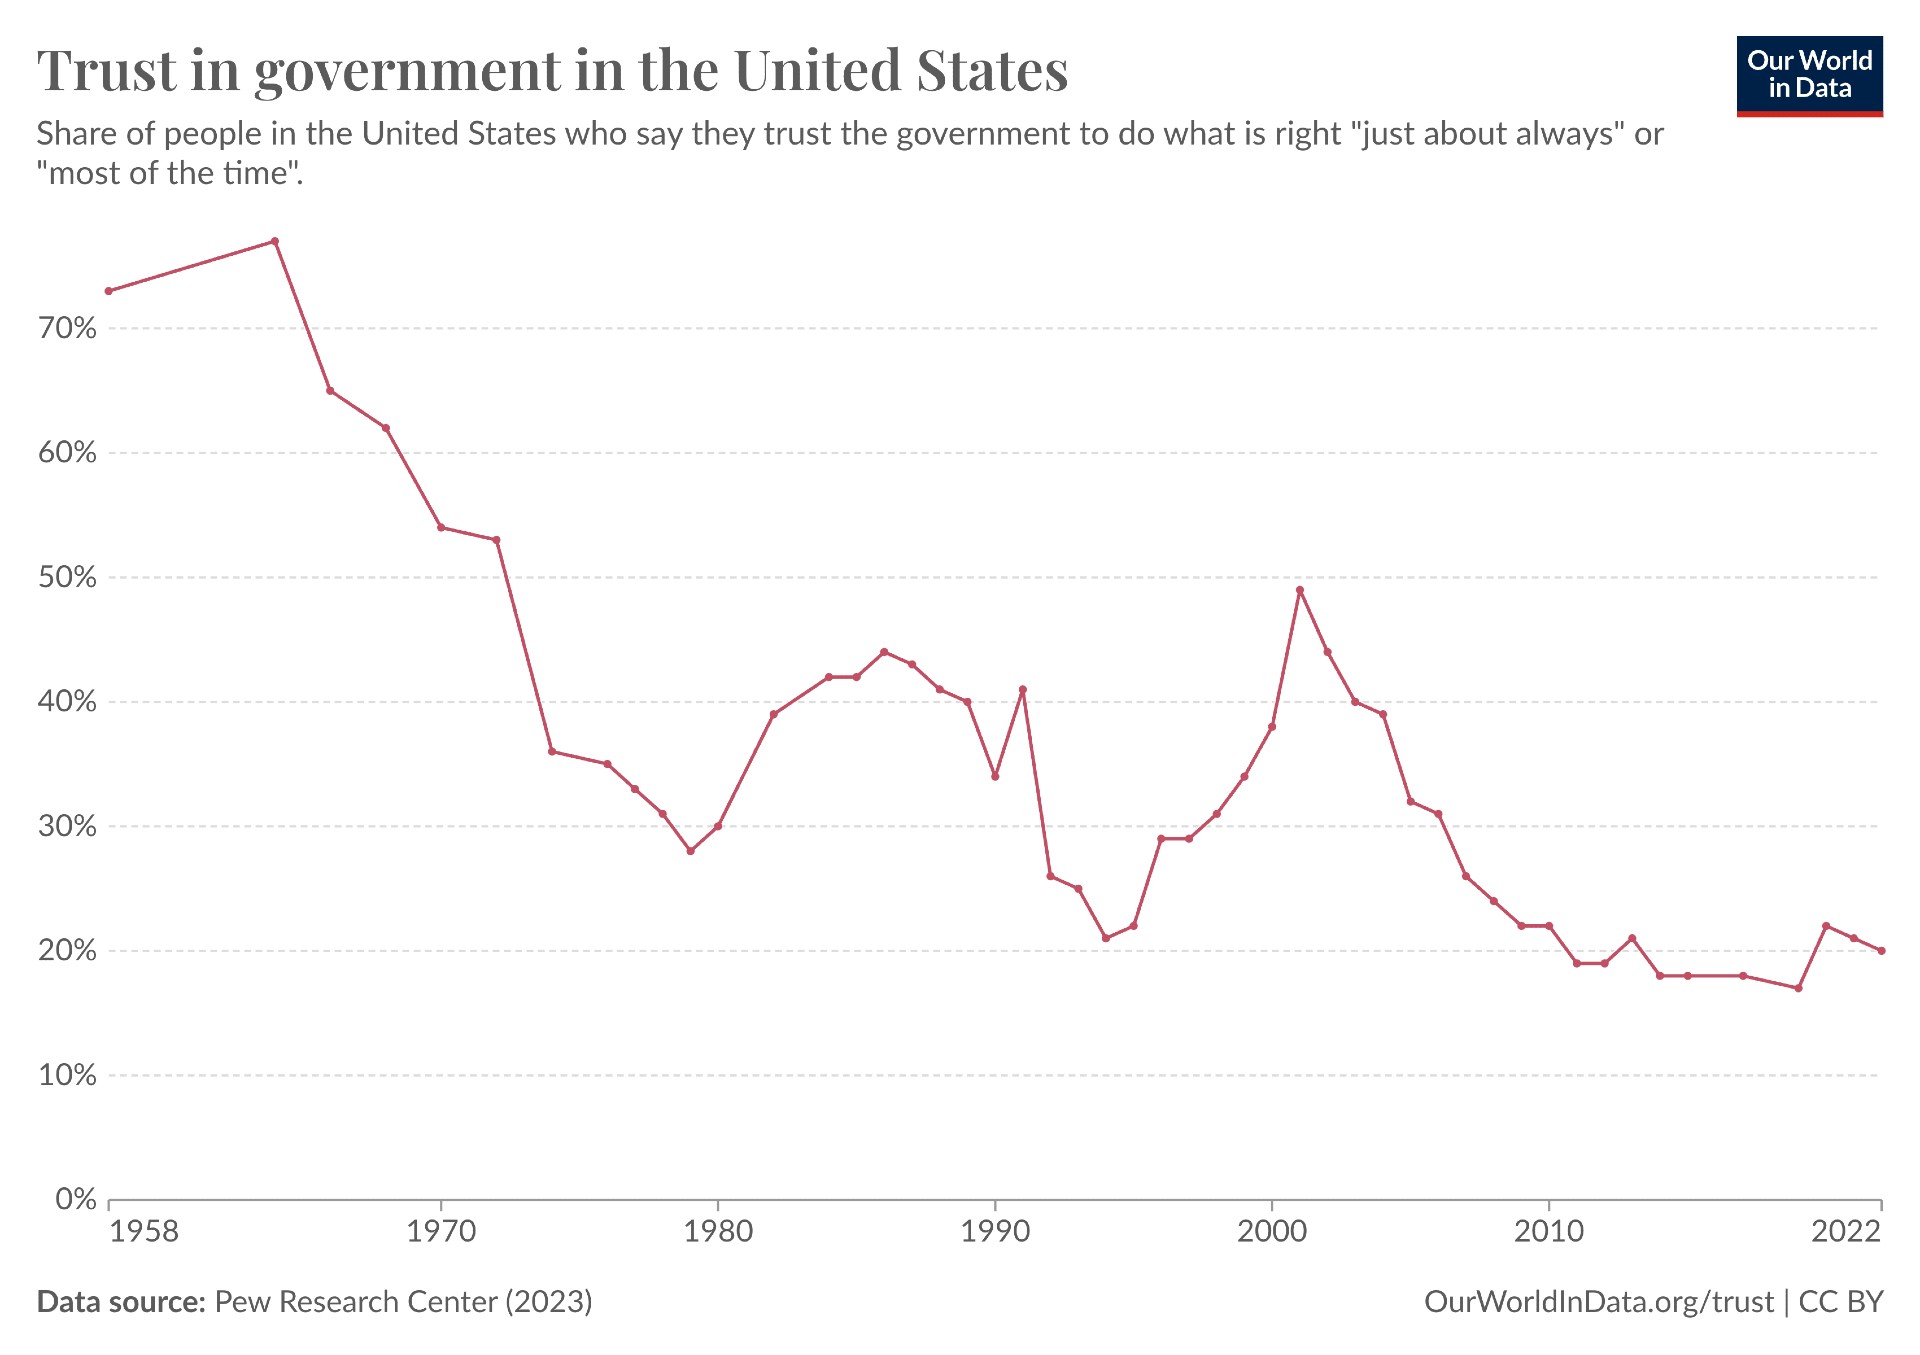 Graph depicting the declining trend of trust in government among people in the united states from 1958 to 2022.